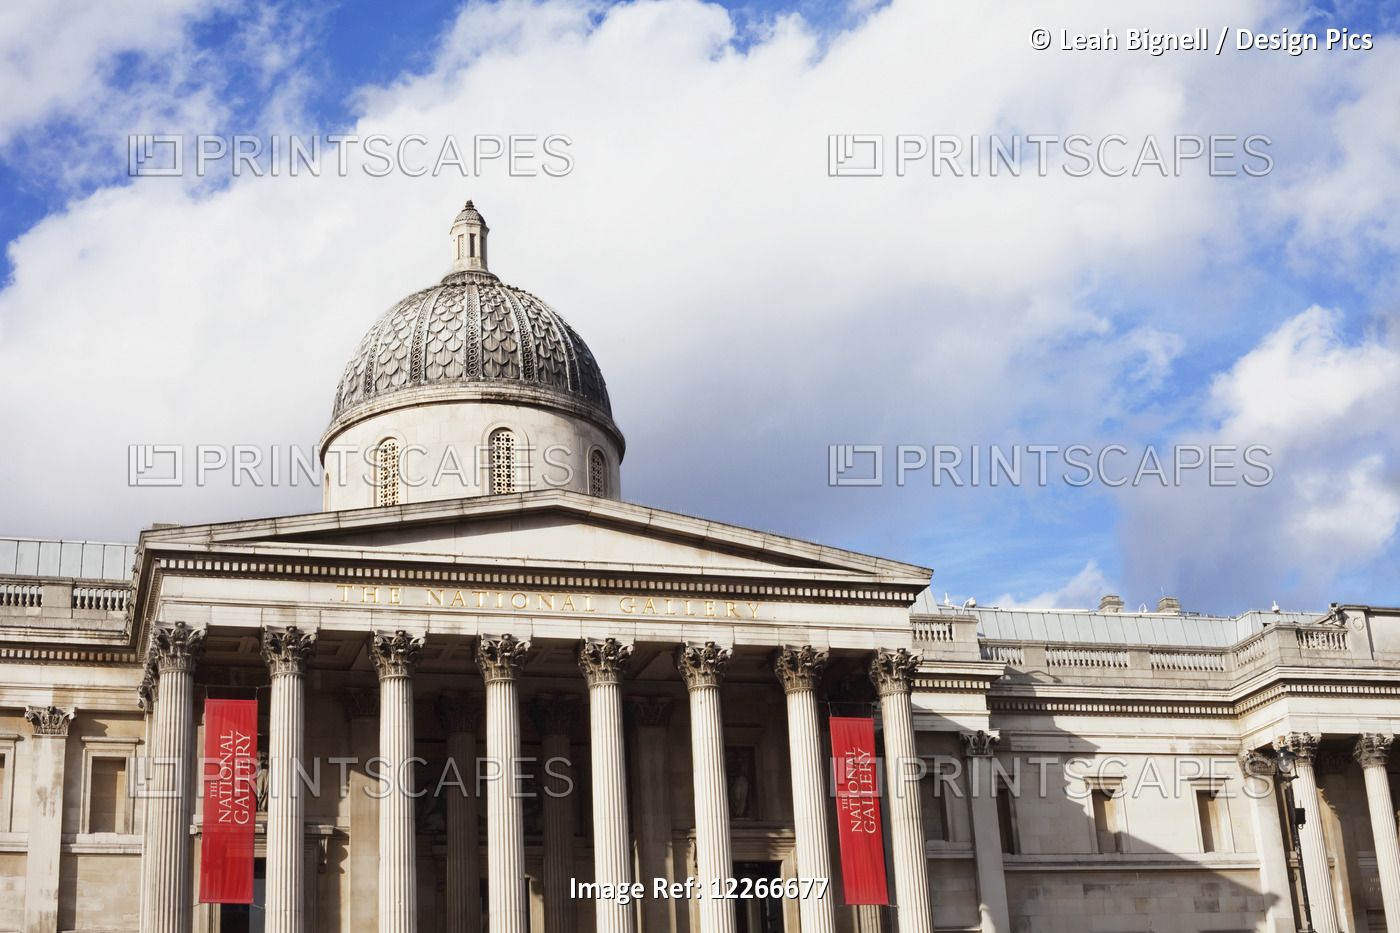 The National Gallery; London, England